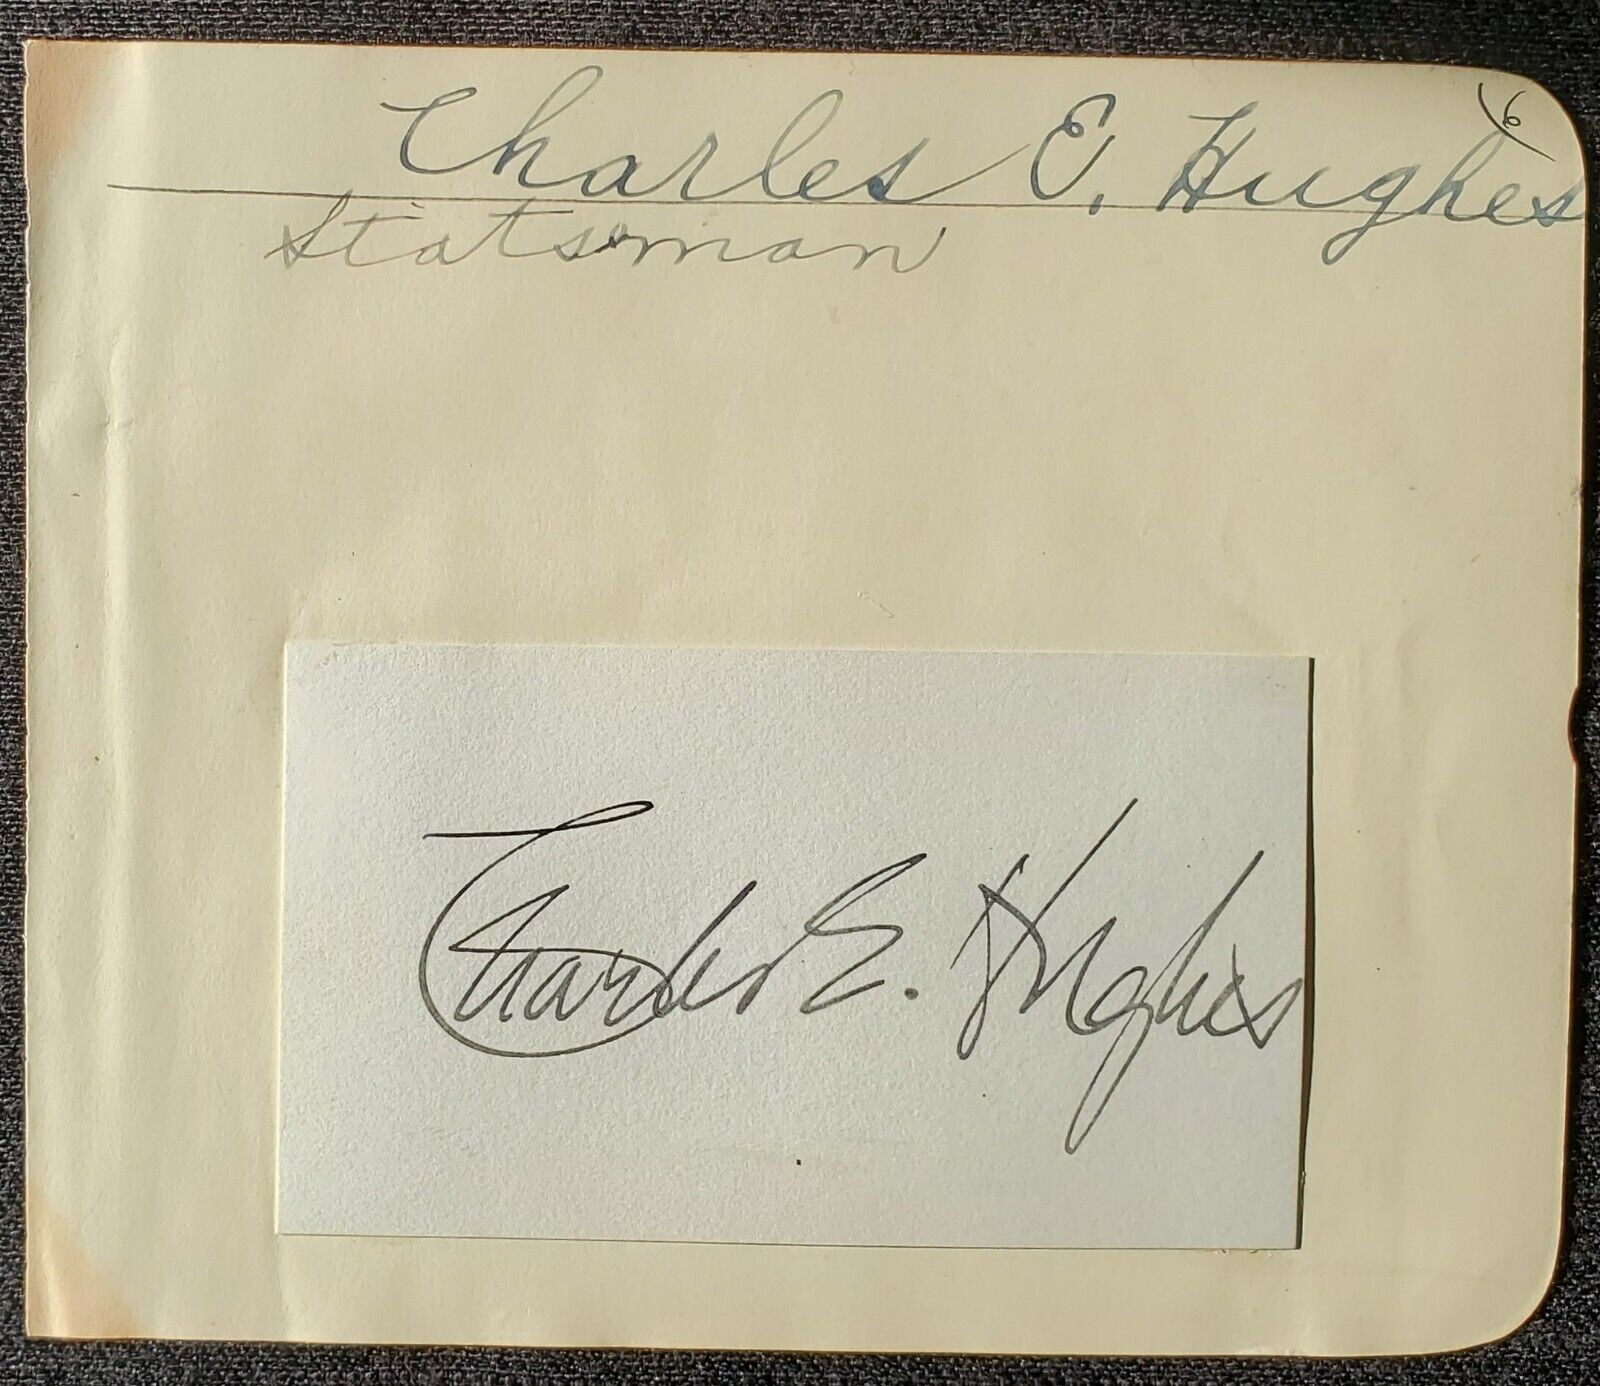 1920s/30s US Chief Justice + Secretary of State Charles E. Hughes Autograph Card